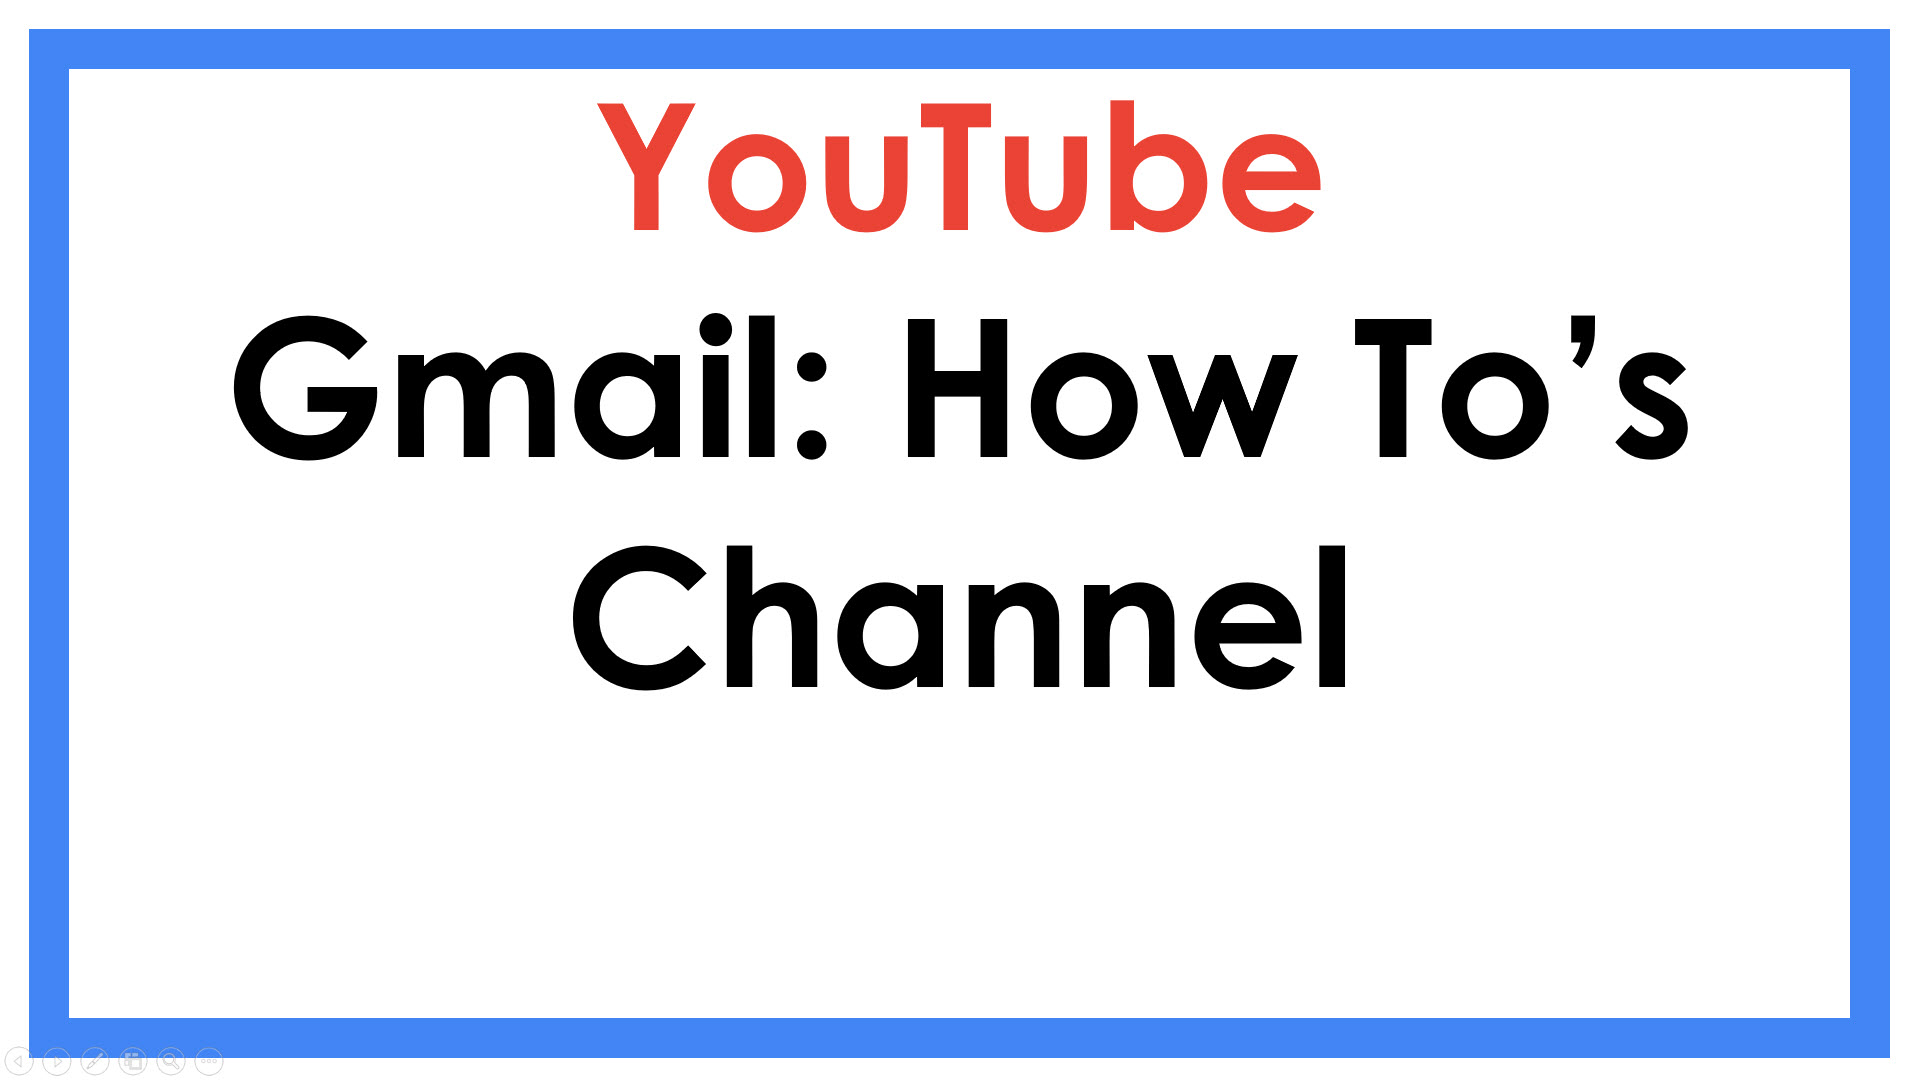 Gmail: Hot To's Channel